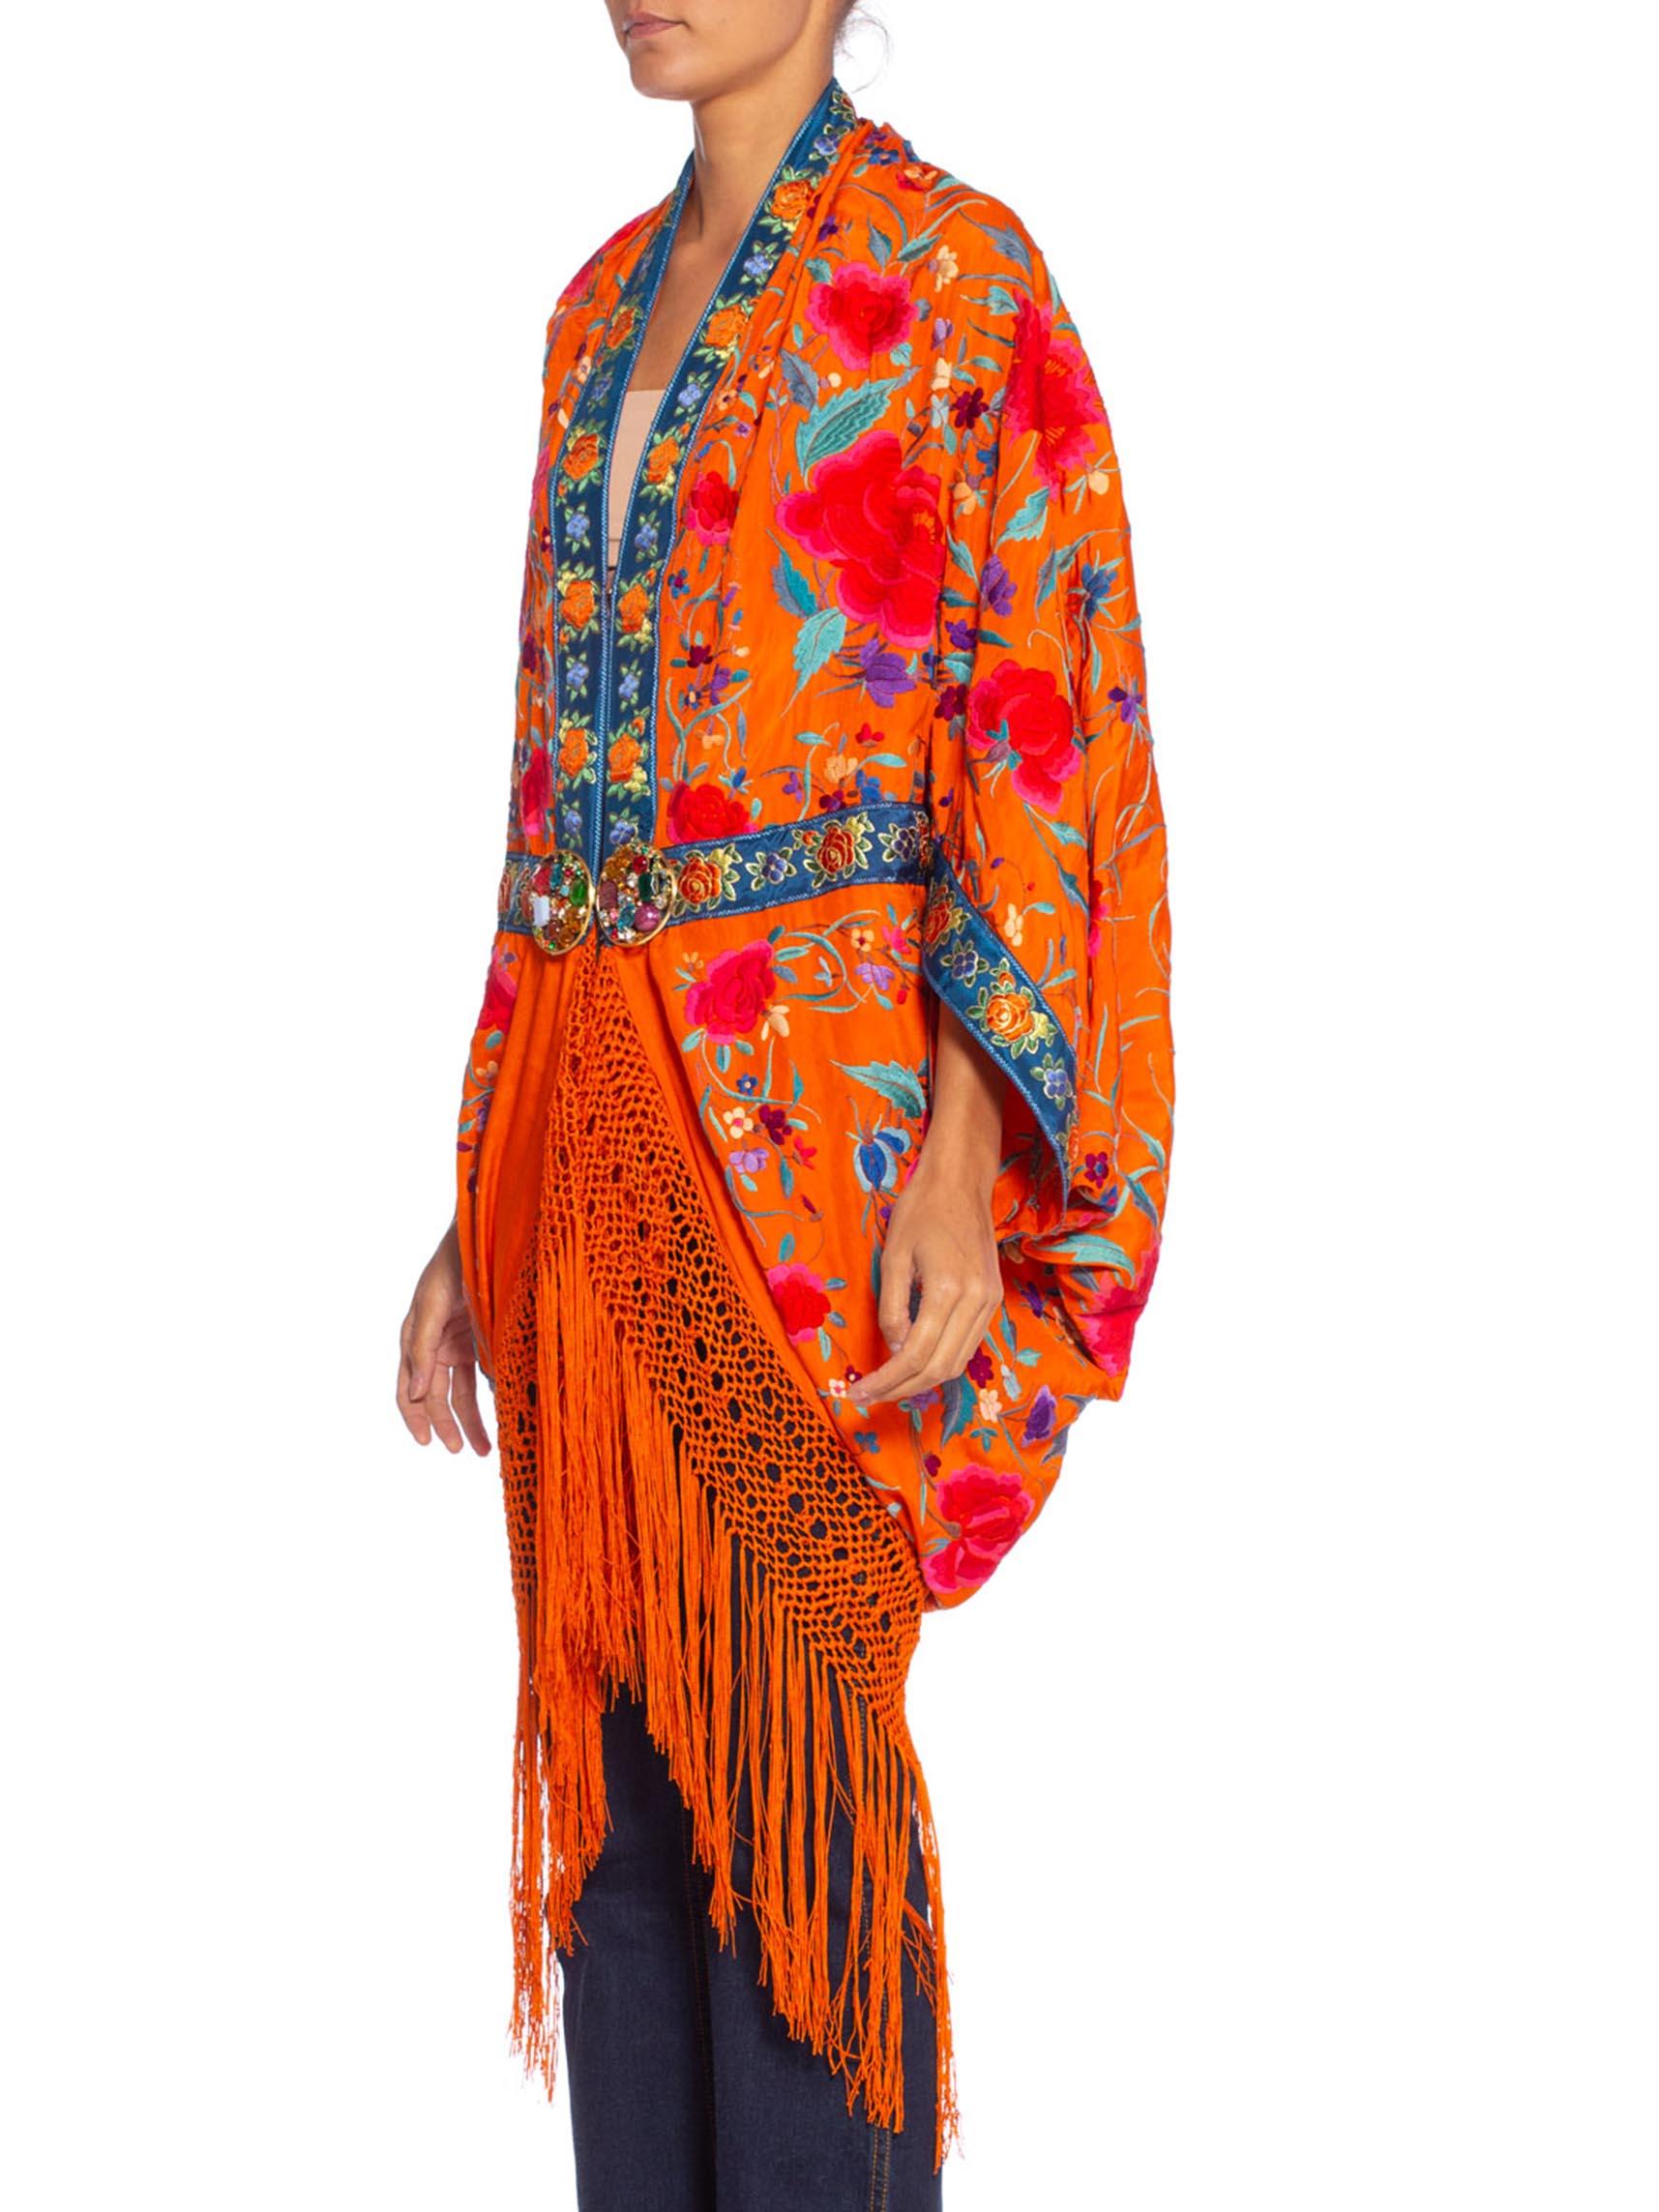 Women's MORPHEW COLLECTION Orange Hand Embroidered Silk Piano Shawl Cocoon With Fringe M